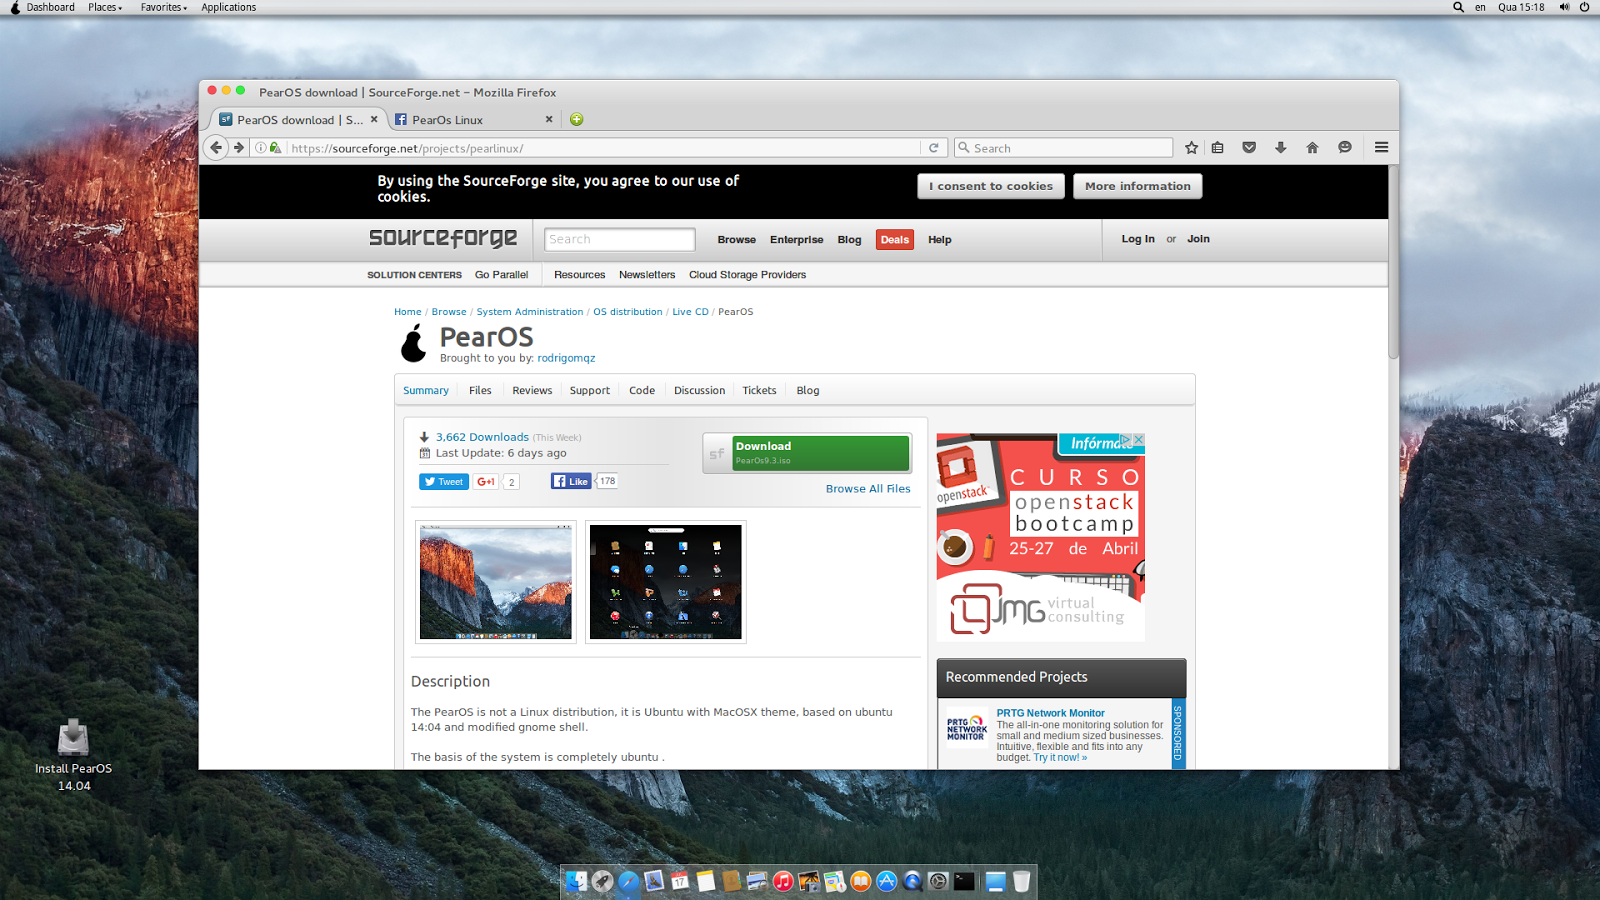 Https sourceforge net projects. PEAROS 9. PEAROS snowmojave. Project.net. PEAROS nicec0re.